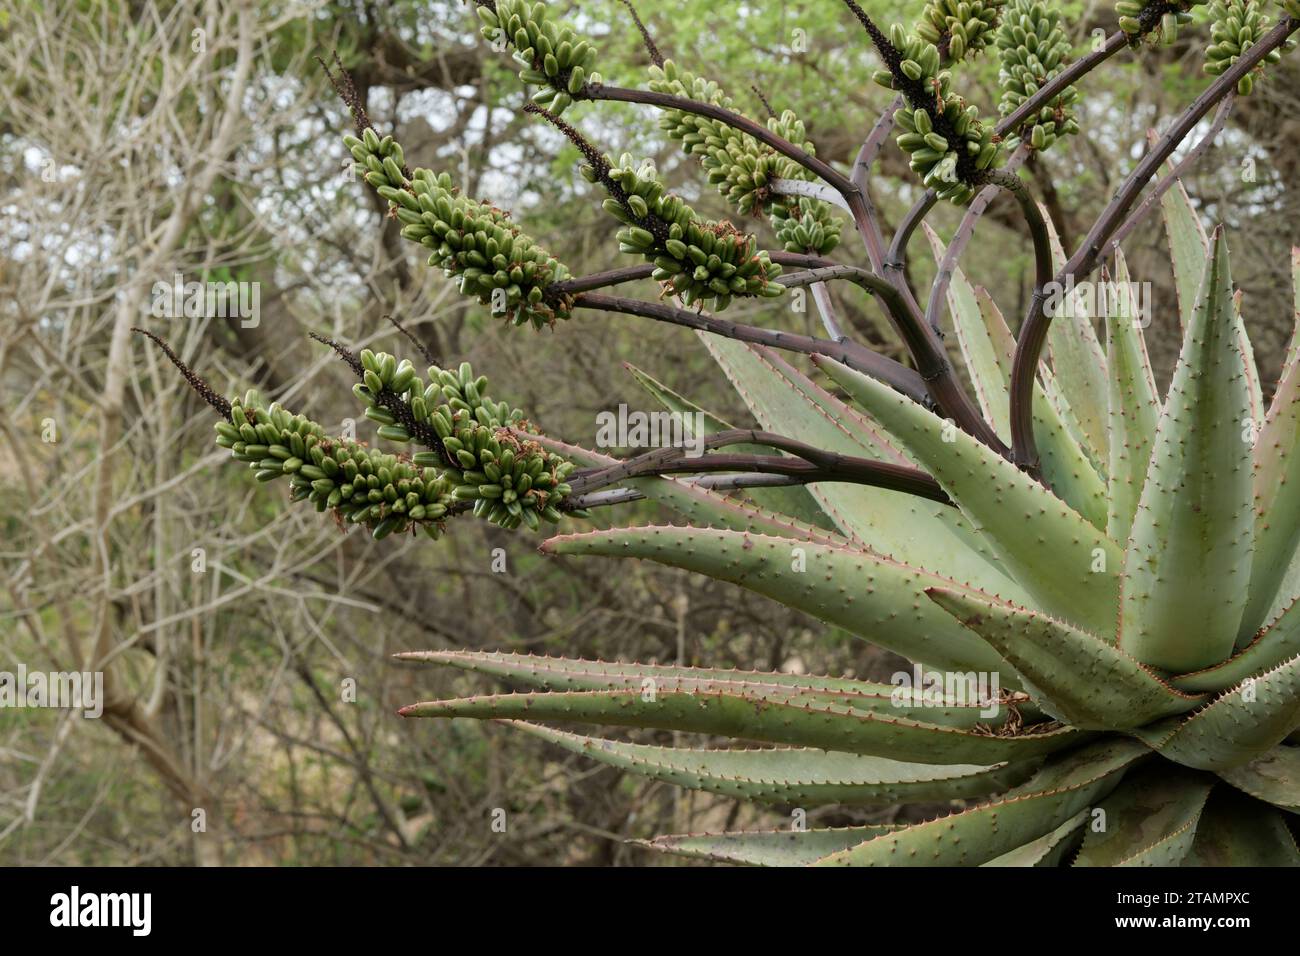 Wild succulent plant, Mountain Aloe, A  marlothii, growing in natural environment, showing fruit capsules KwaZulu-Natal, South Africa Stock Photo